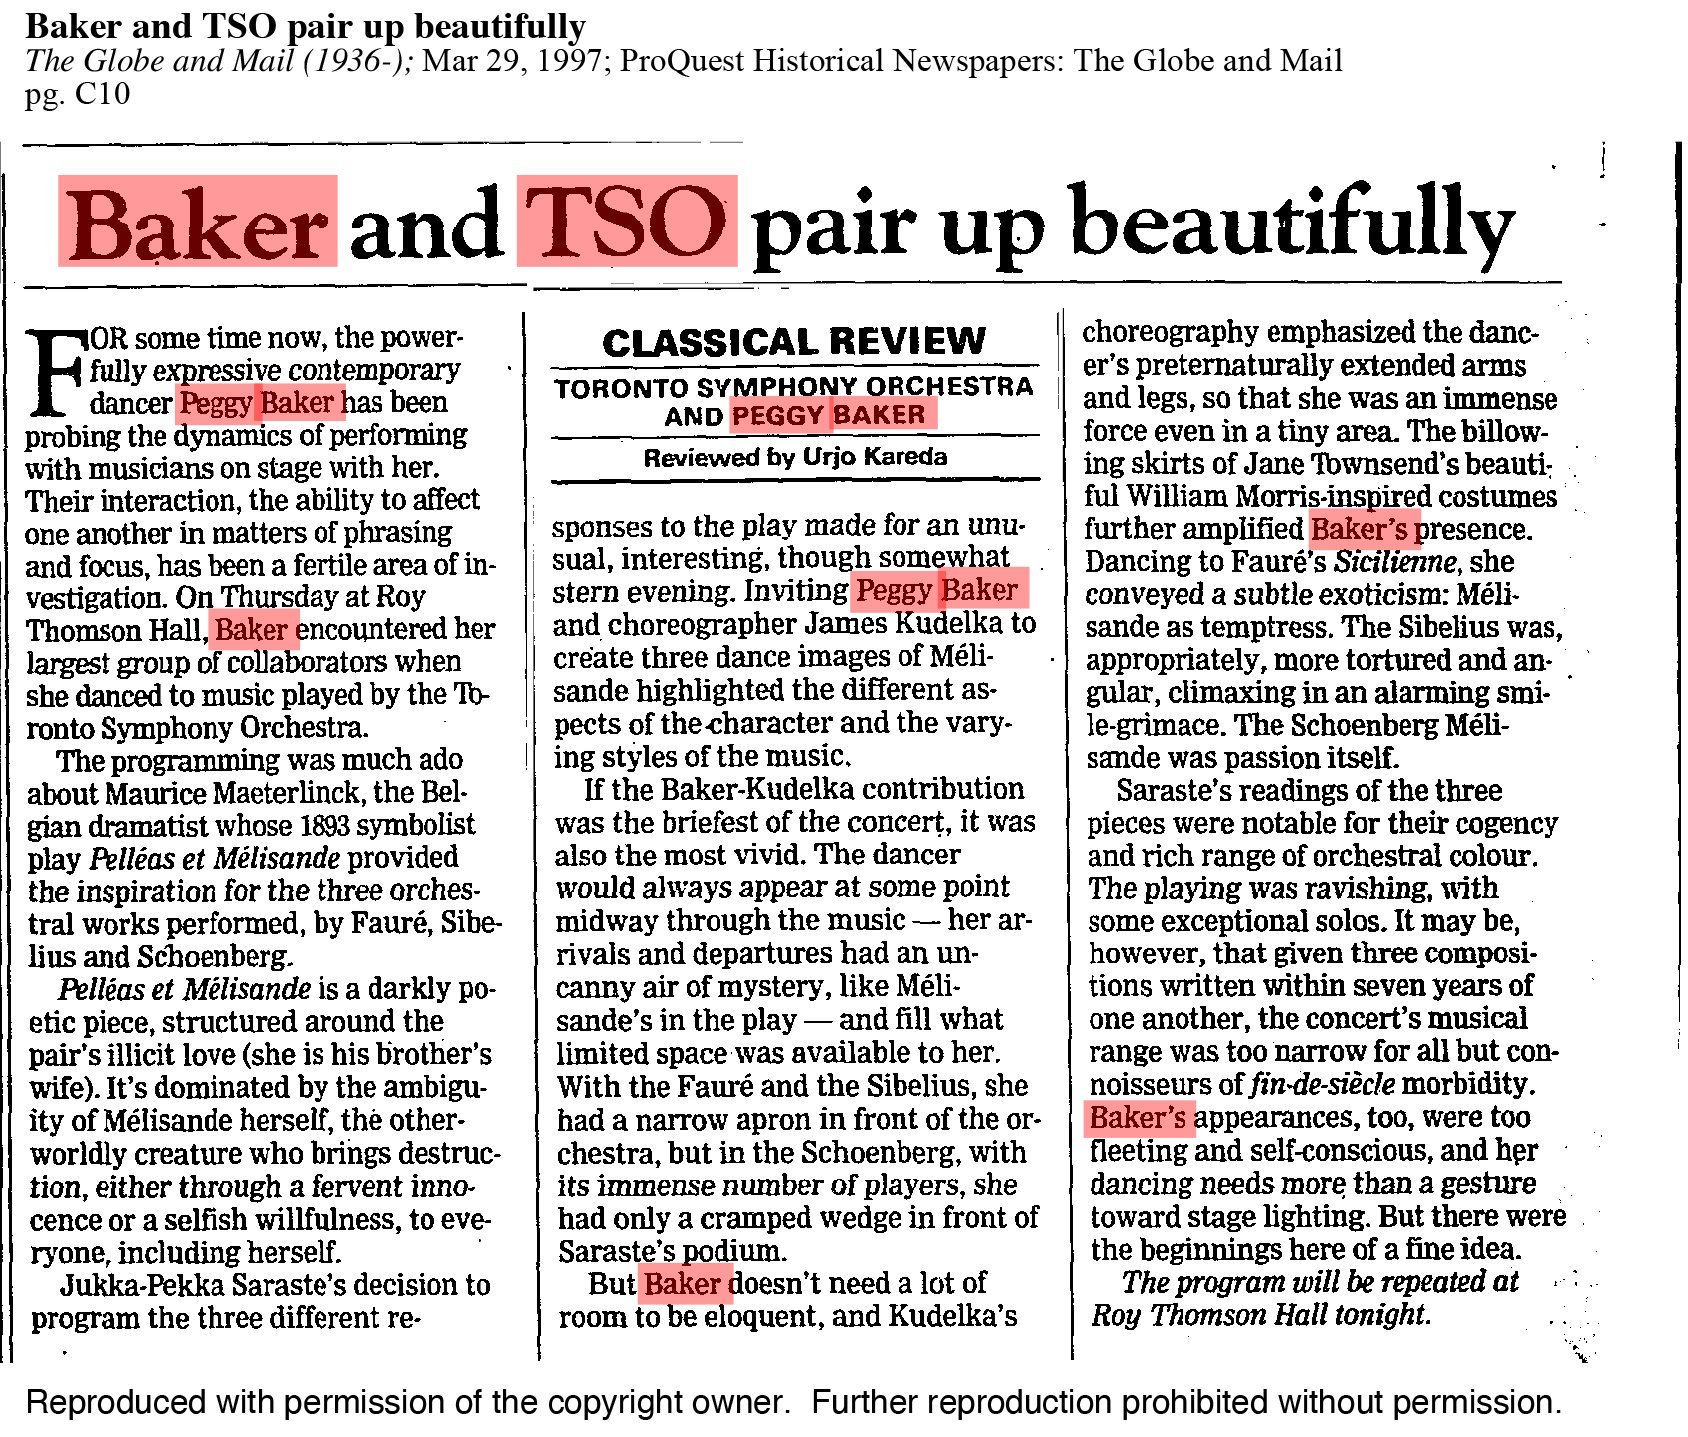 Baker and TSO pair up beautifully by Urjo Kareda, reproduced with permission.